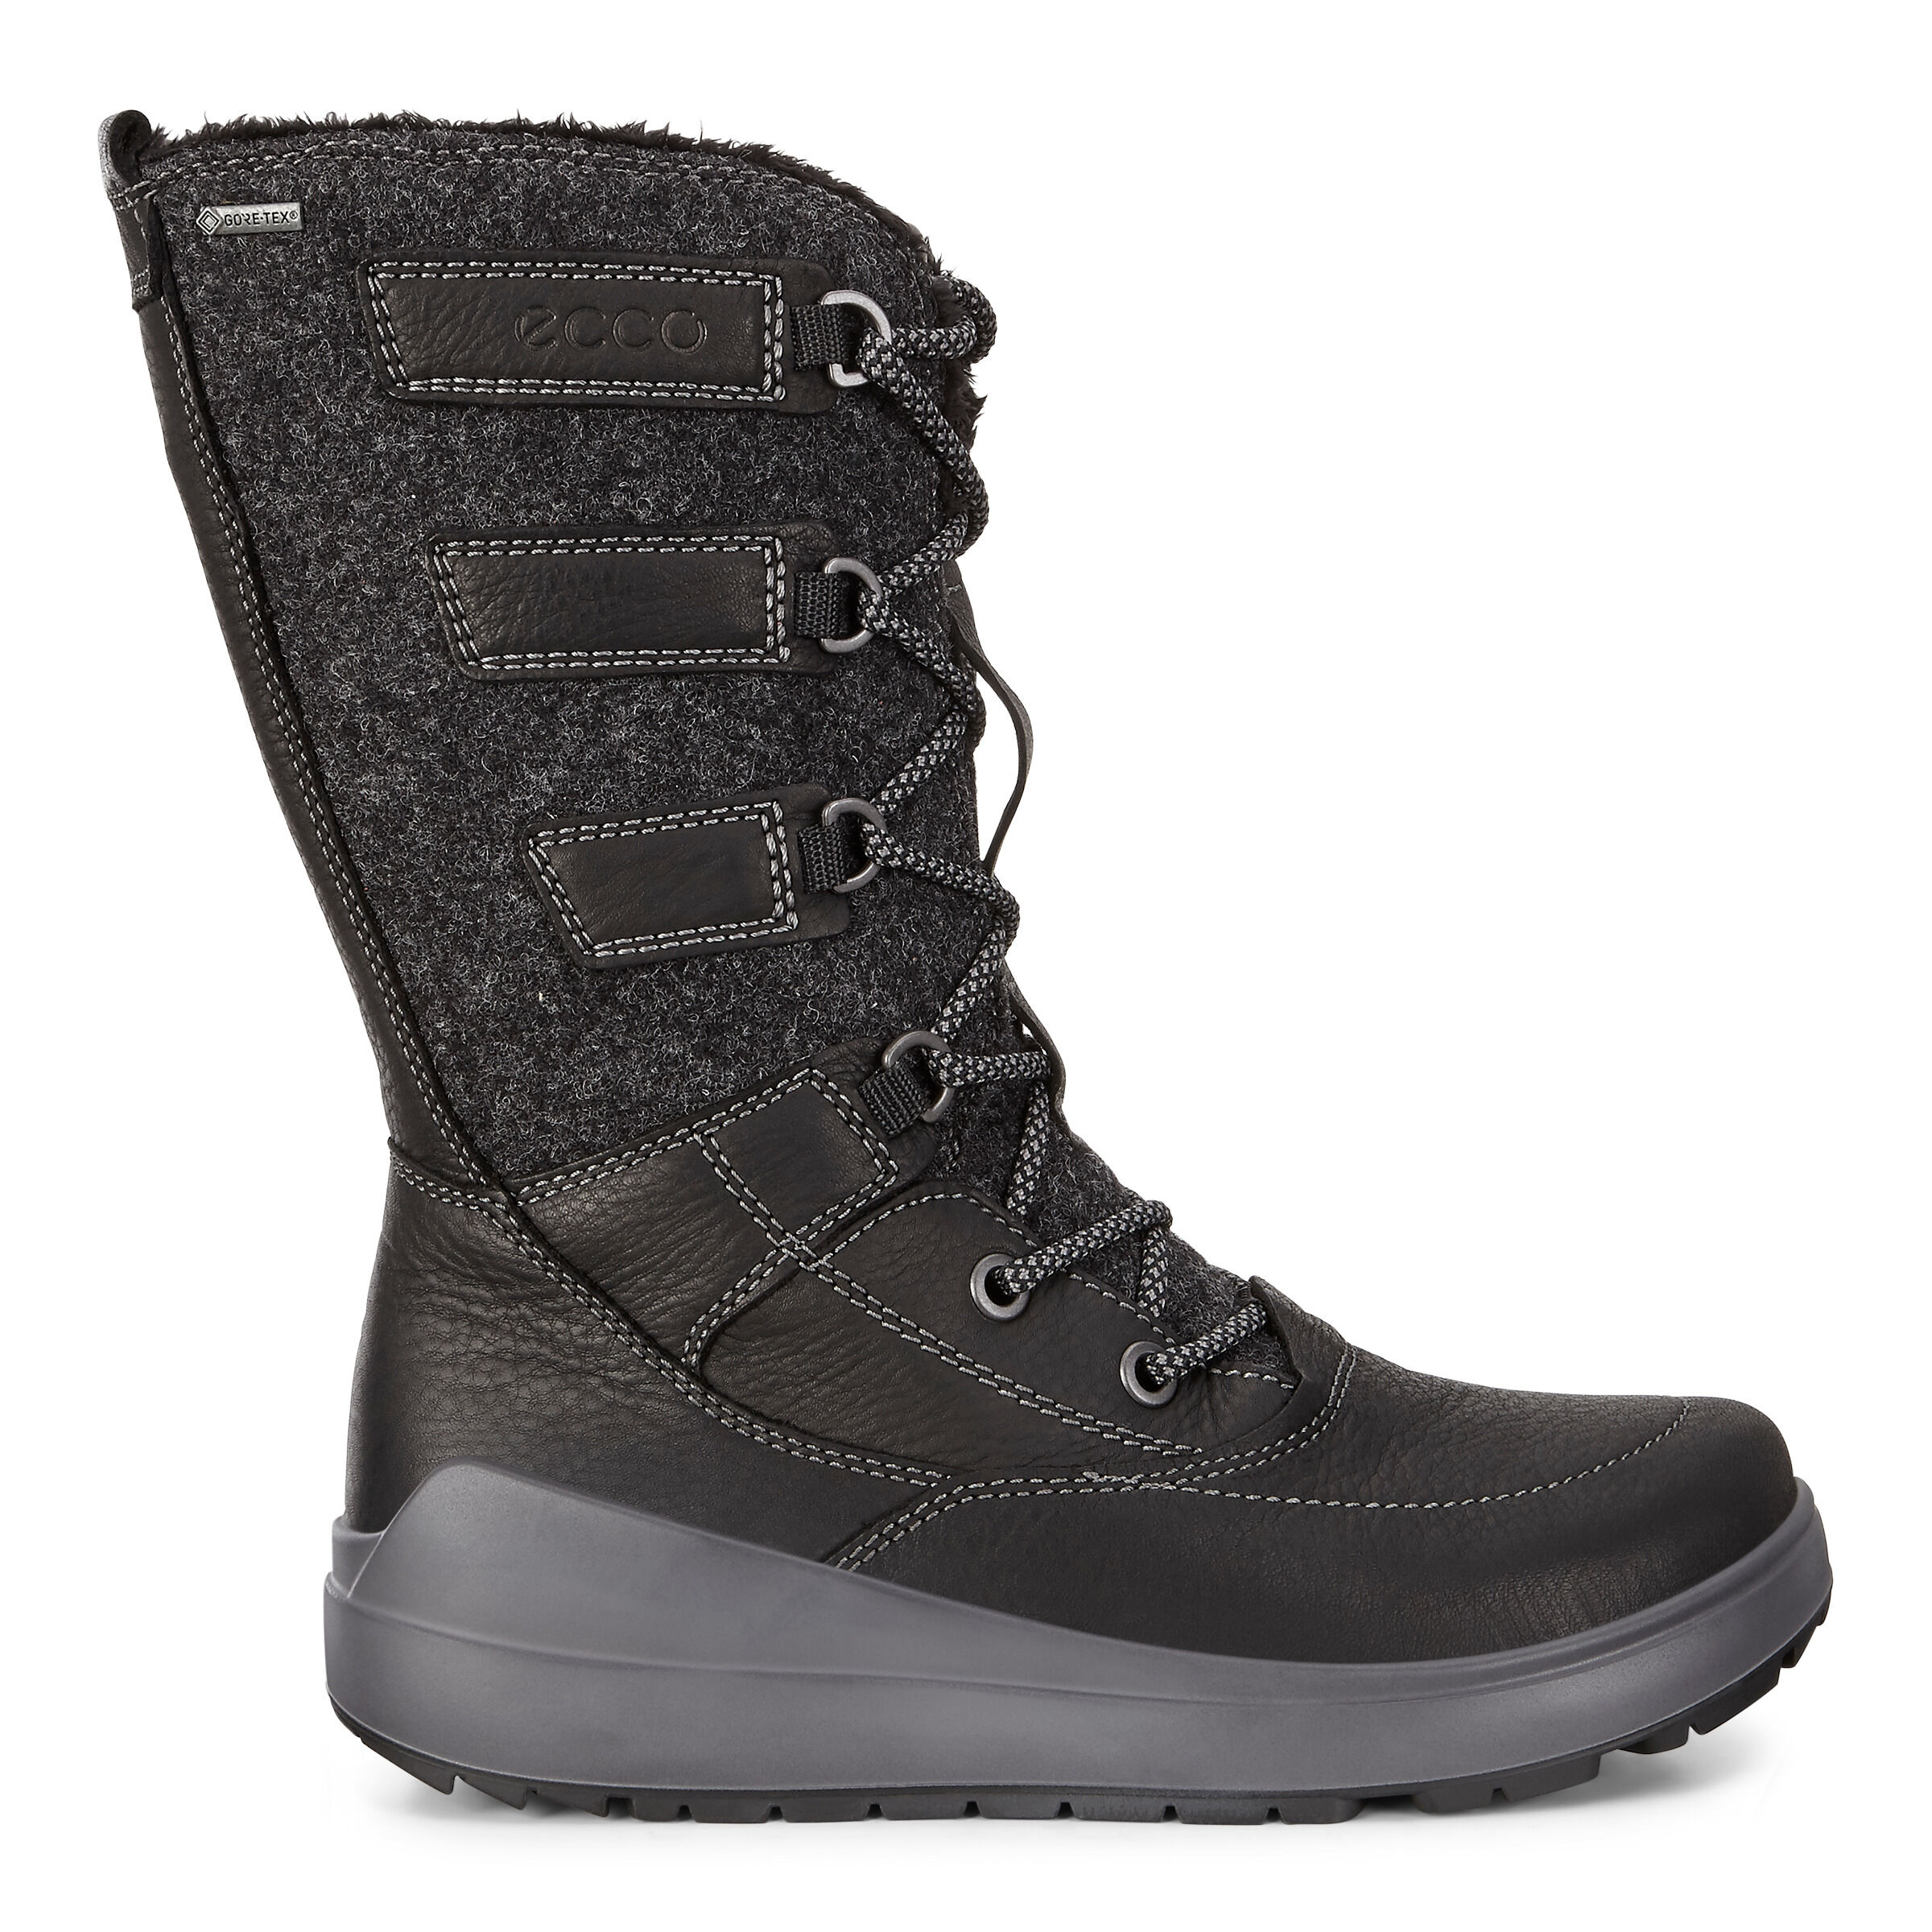 UPC 809704475592 product image for ECCO Womens Noyce GTX High Boots Size 10/10.5 Black | upcitemdb.com